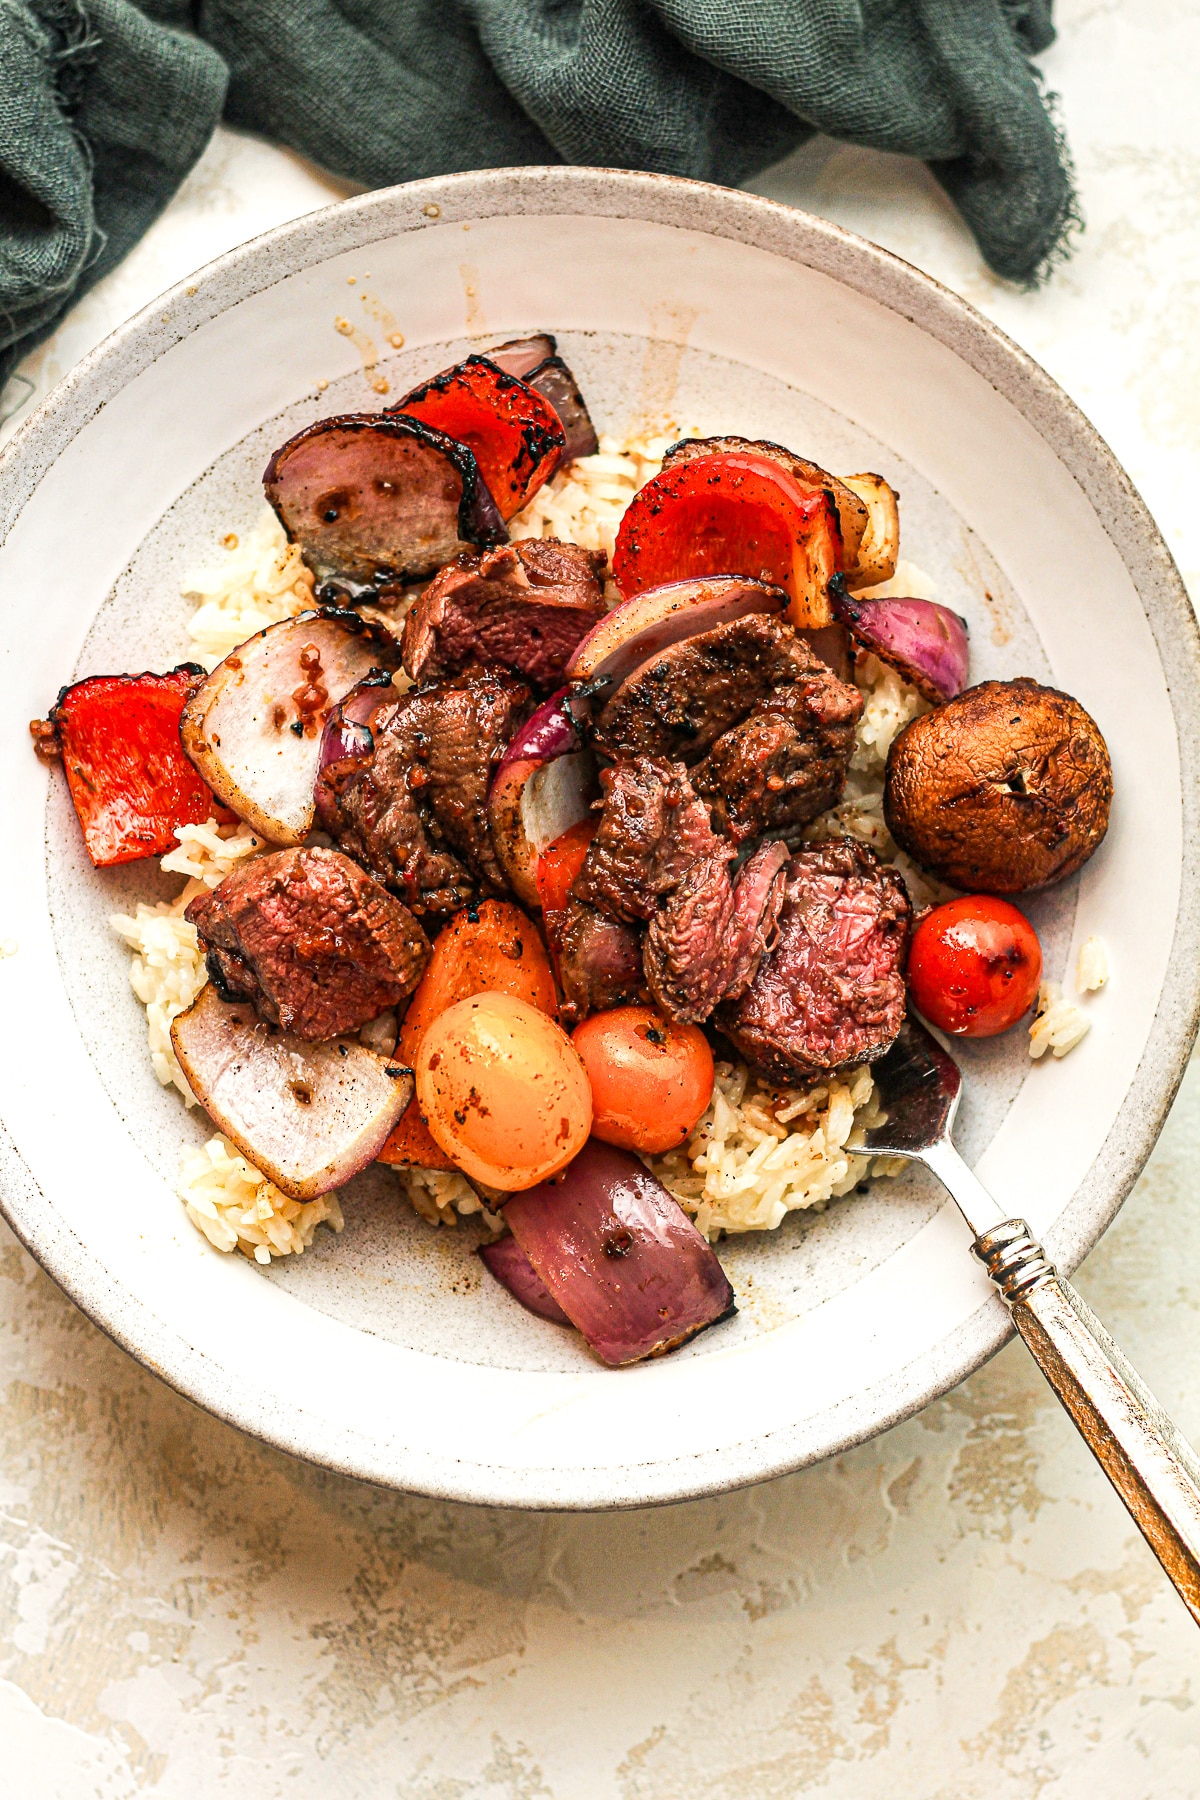 A bowl of the steak kabobs with veggies.